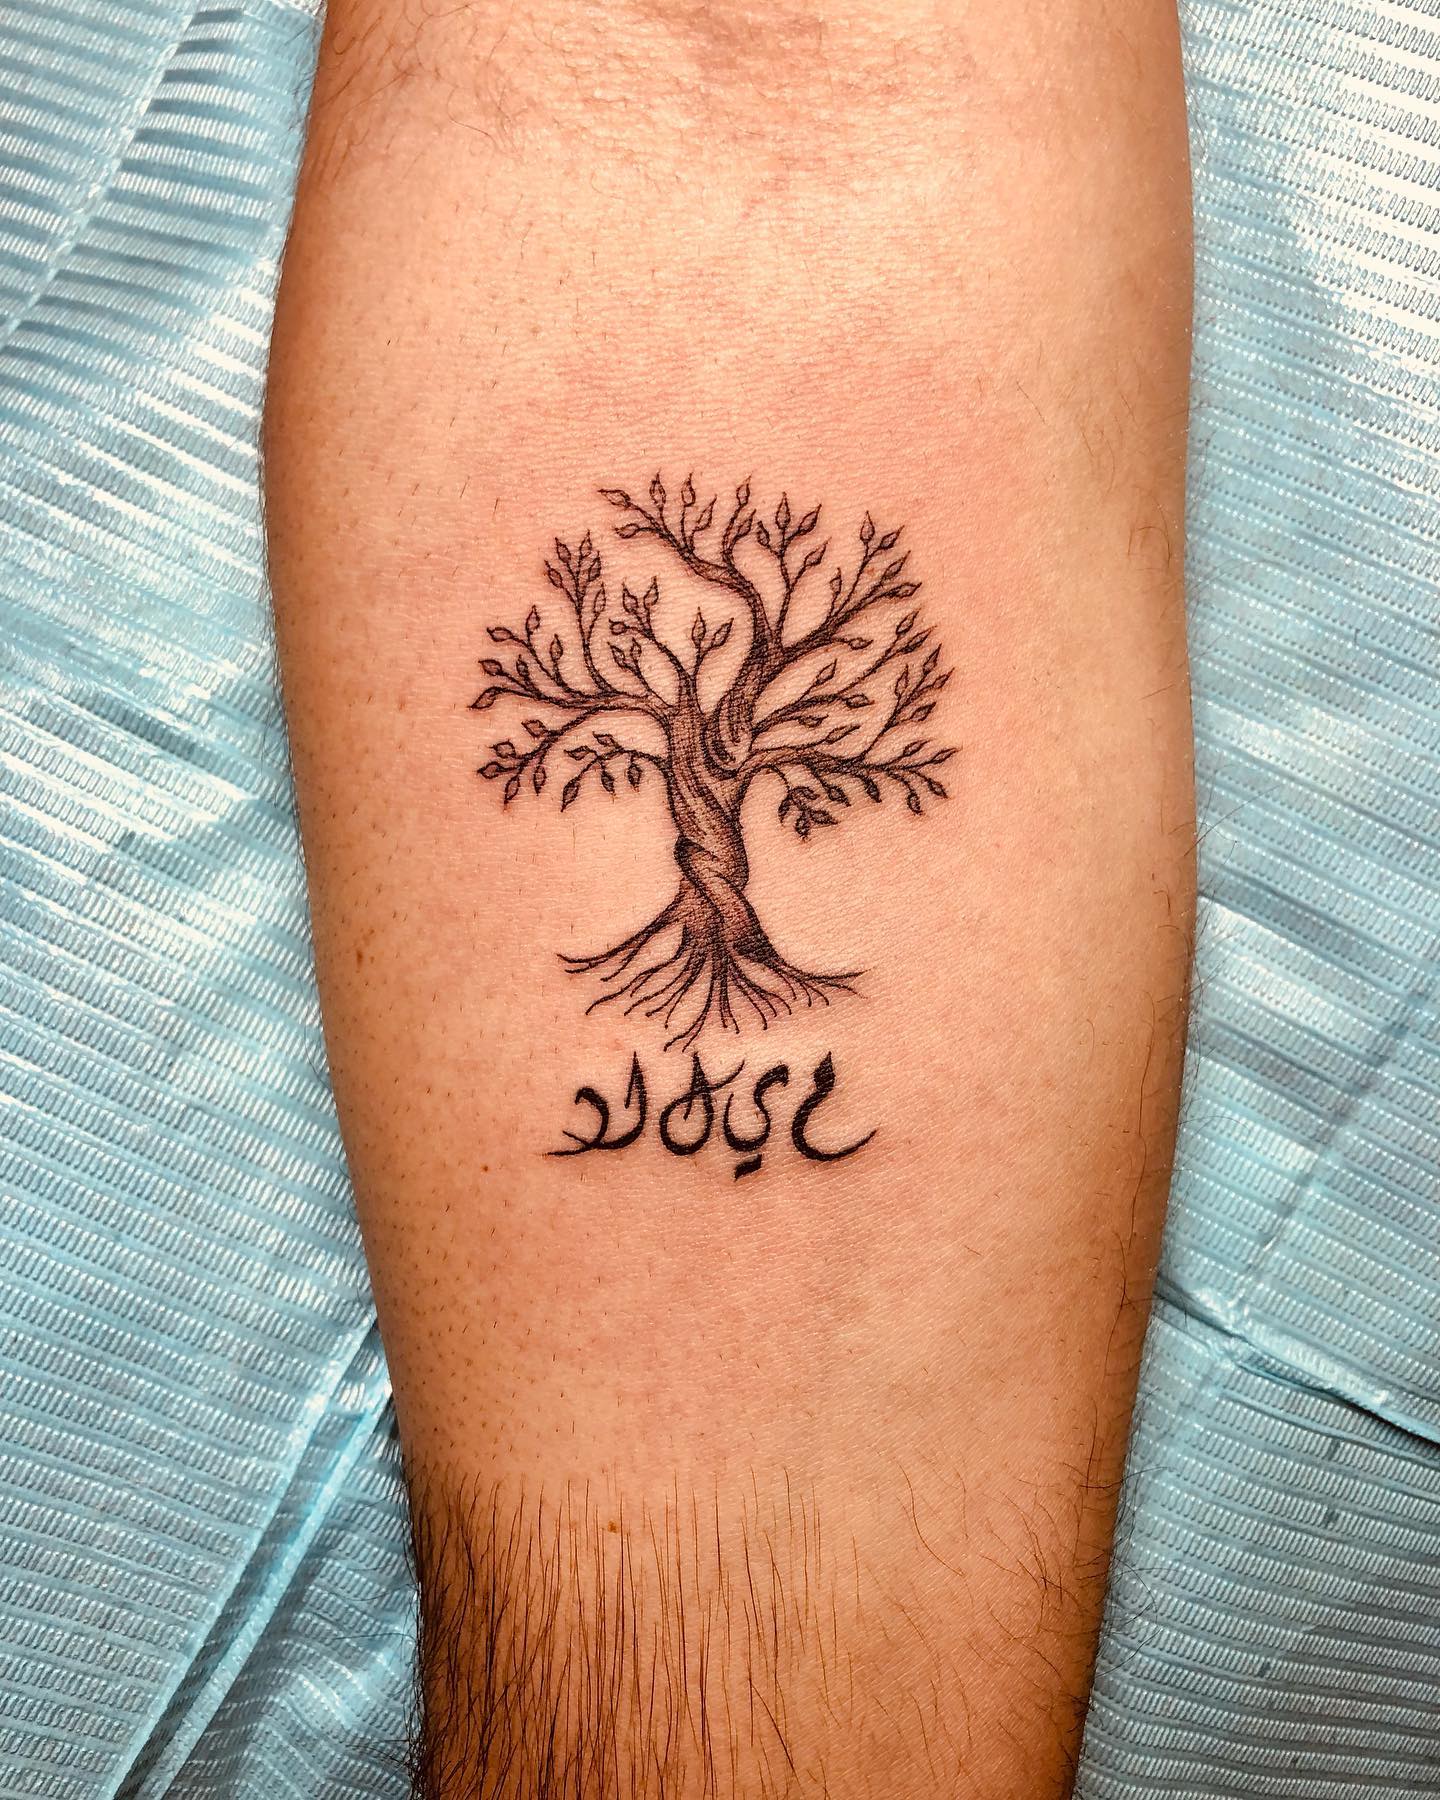 Trees symbolize wisdom, knowledge and growth. Plus, getting a family tree will help you express your love that you feel towards your family.